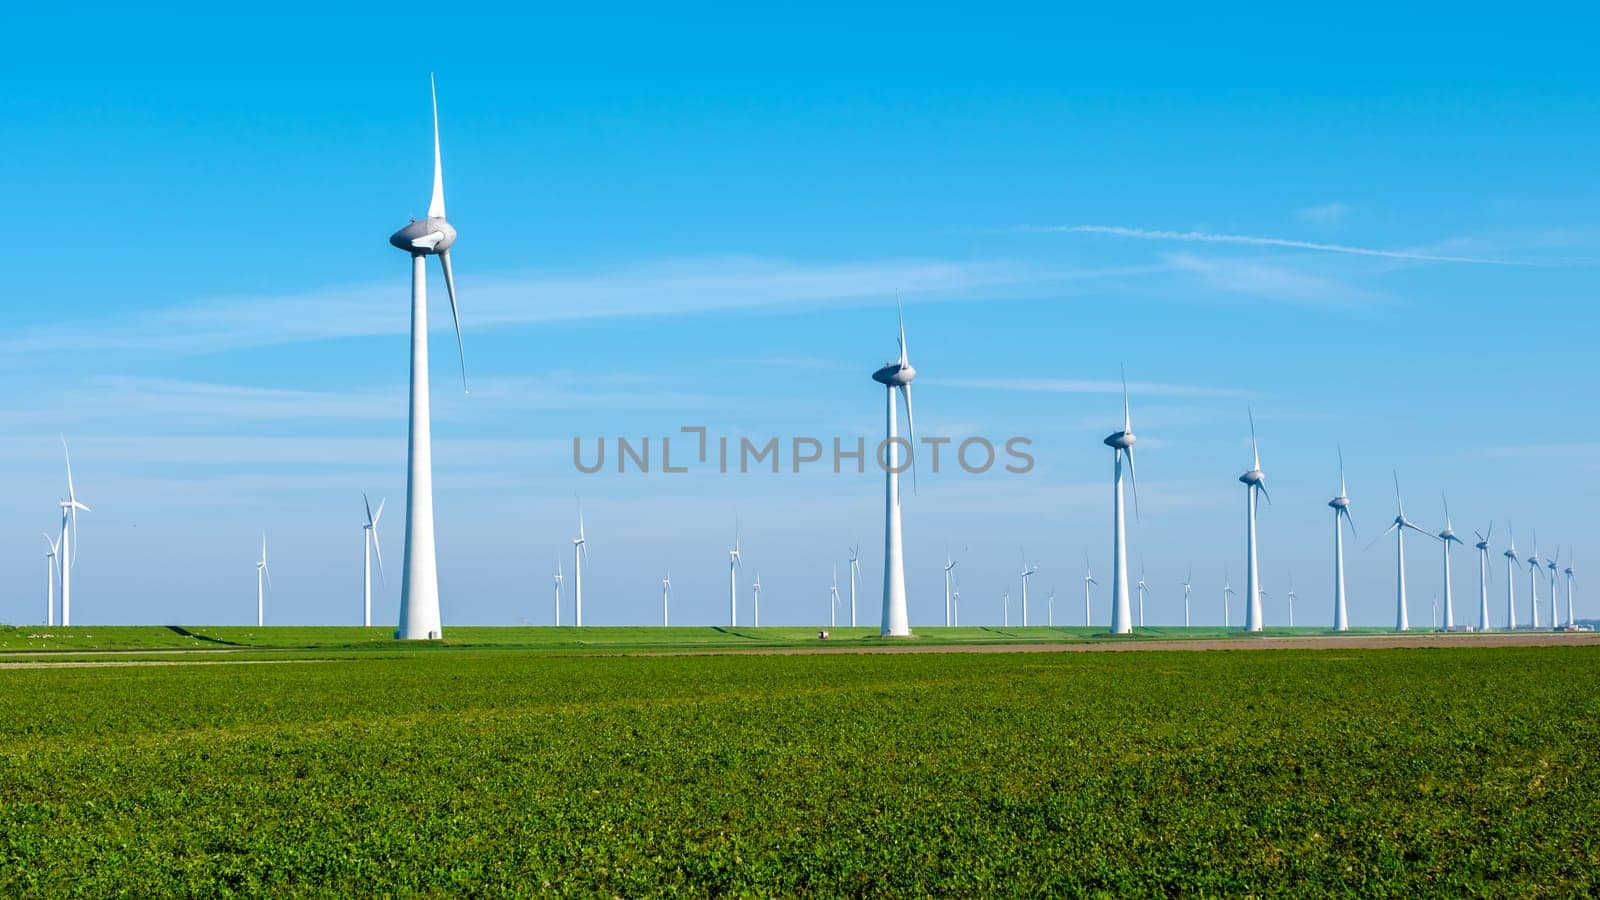 A row of majestic wind turbines standing tall in a lush, green field of the Netherlands Flevoland, harnessing the power of the wind to generate renewable energy. windmill turbines with a blue sky